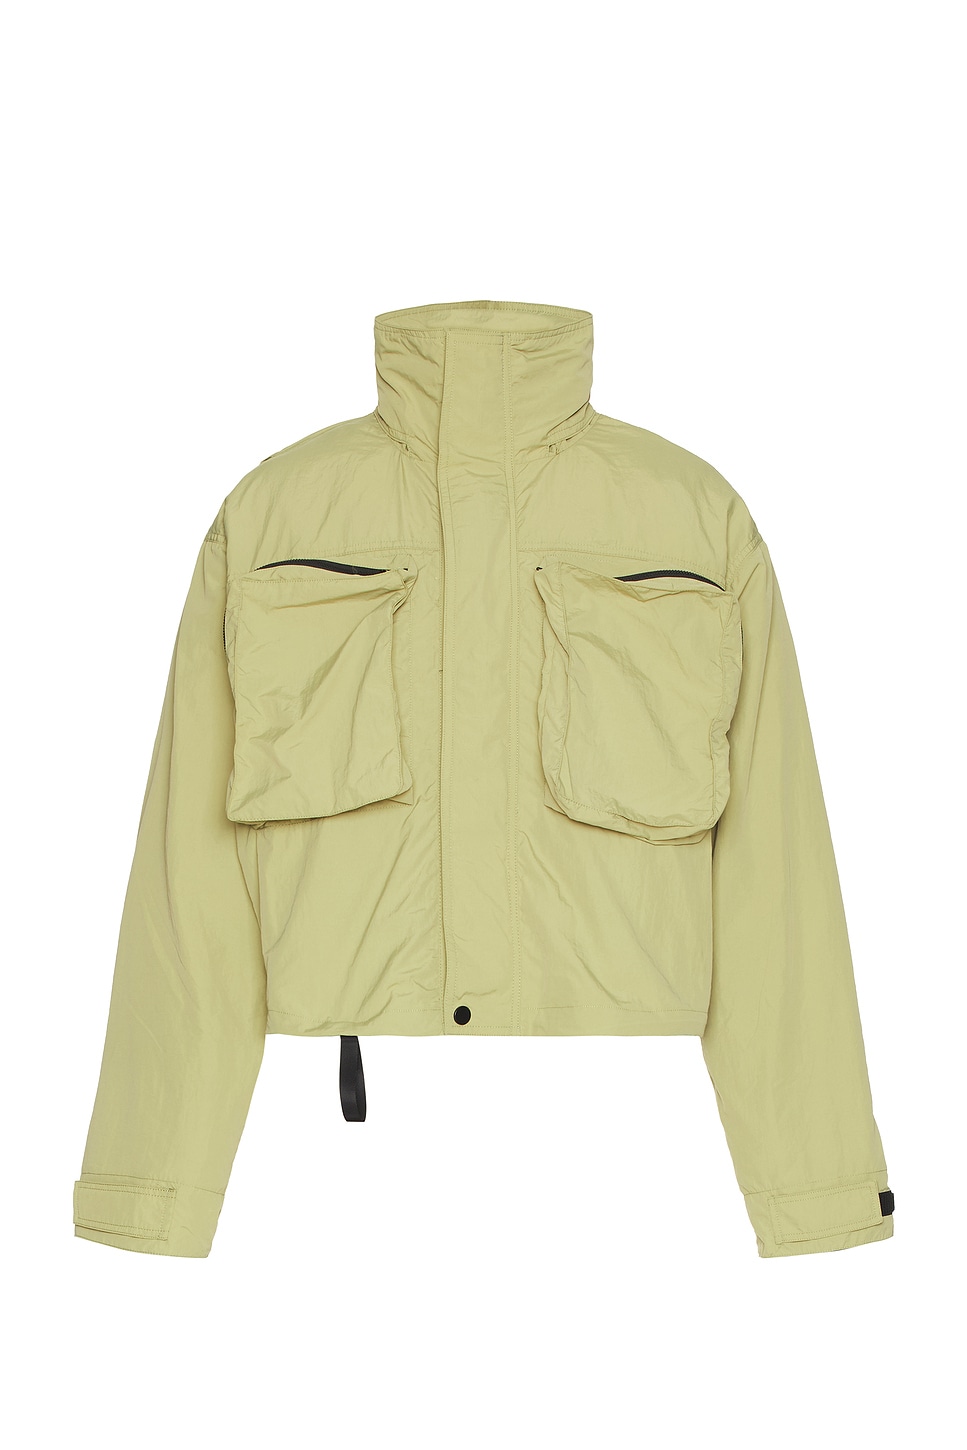 Image 1 of Connor McKnight Gill Back Wading Jacket in Olive